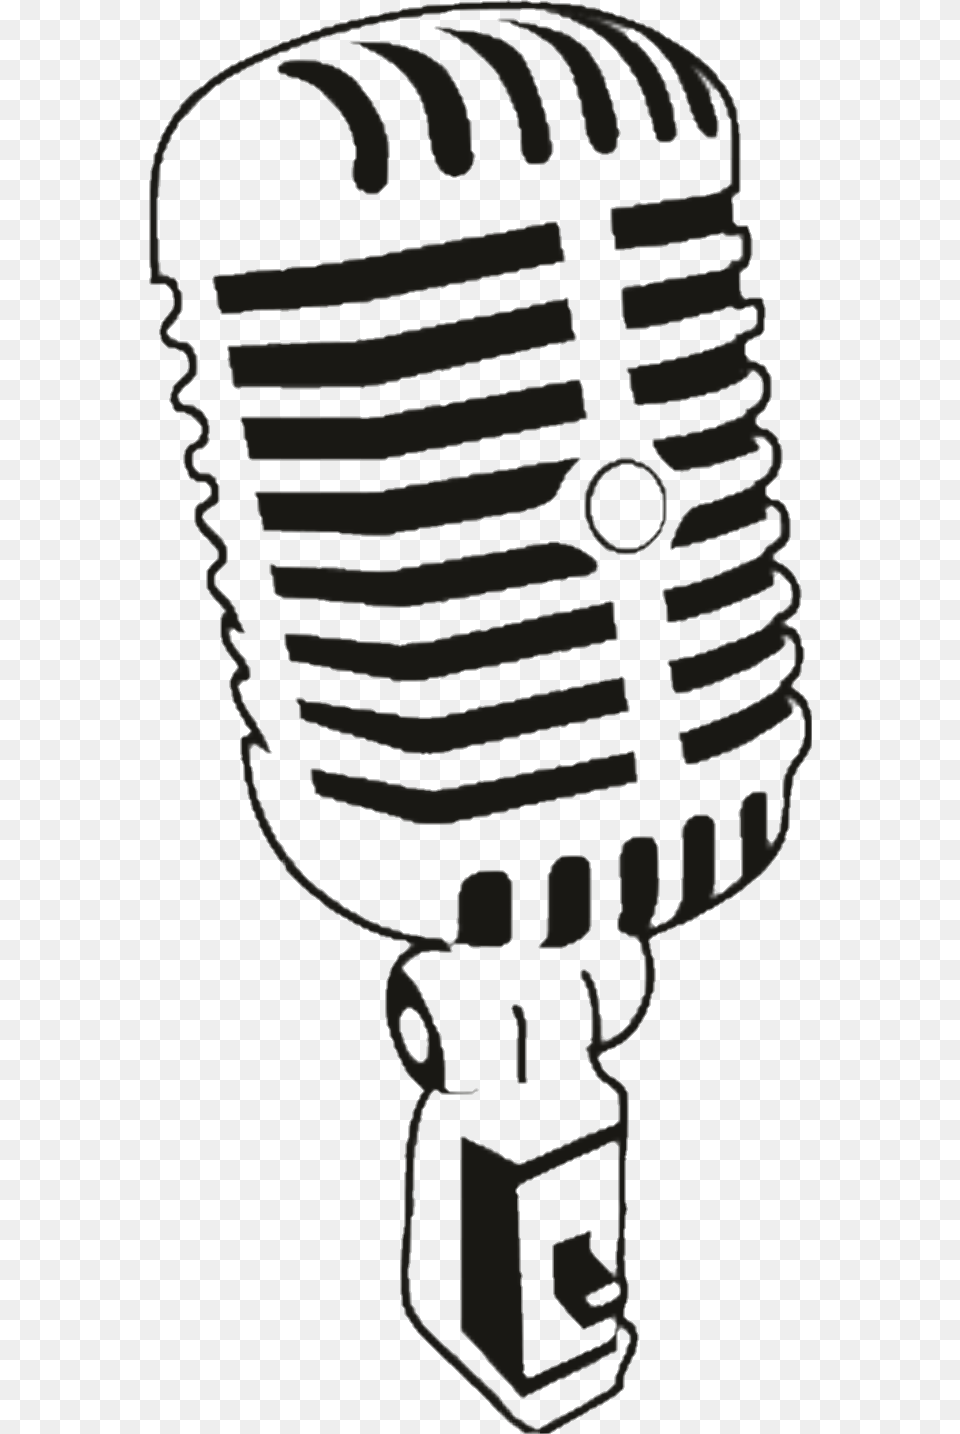 Microphone Rock Microfono Microphone Vector, Electrical Device Free Png